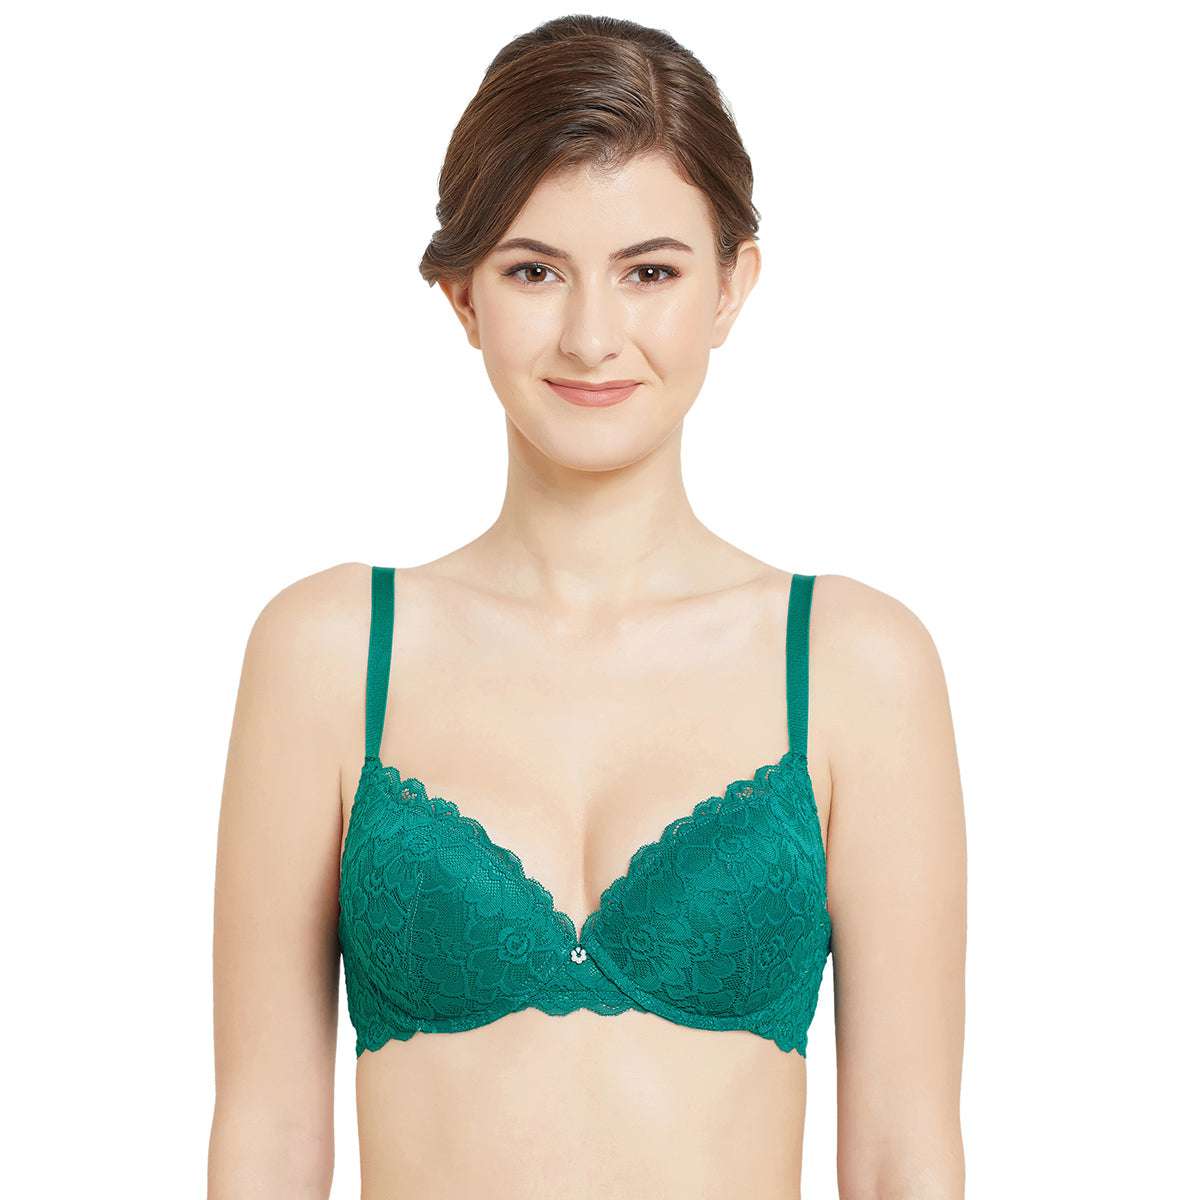 Buy Push Up Bra Size 36b Pink Online at Low Prices in India